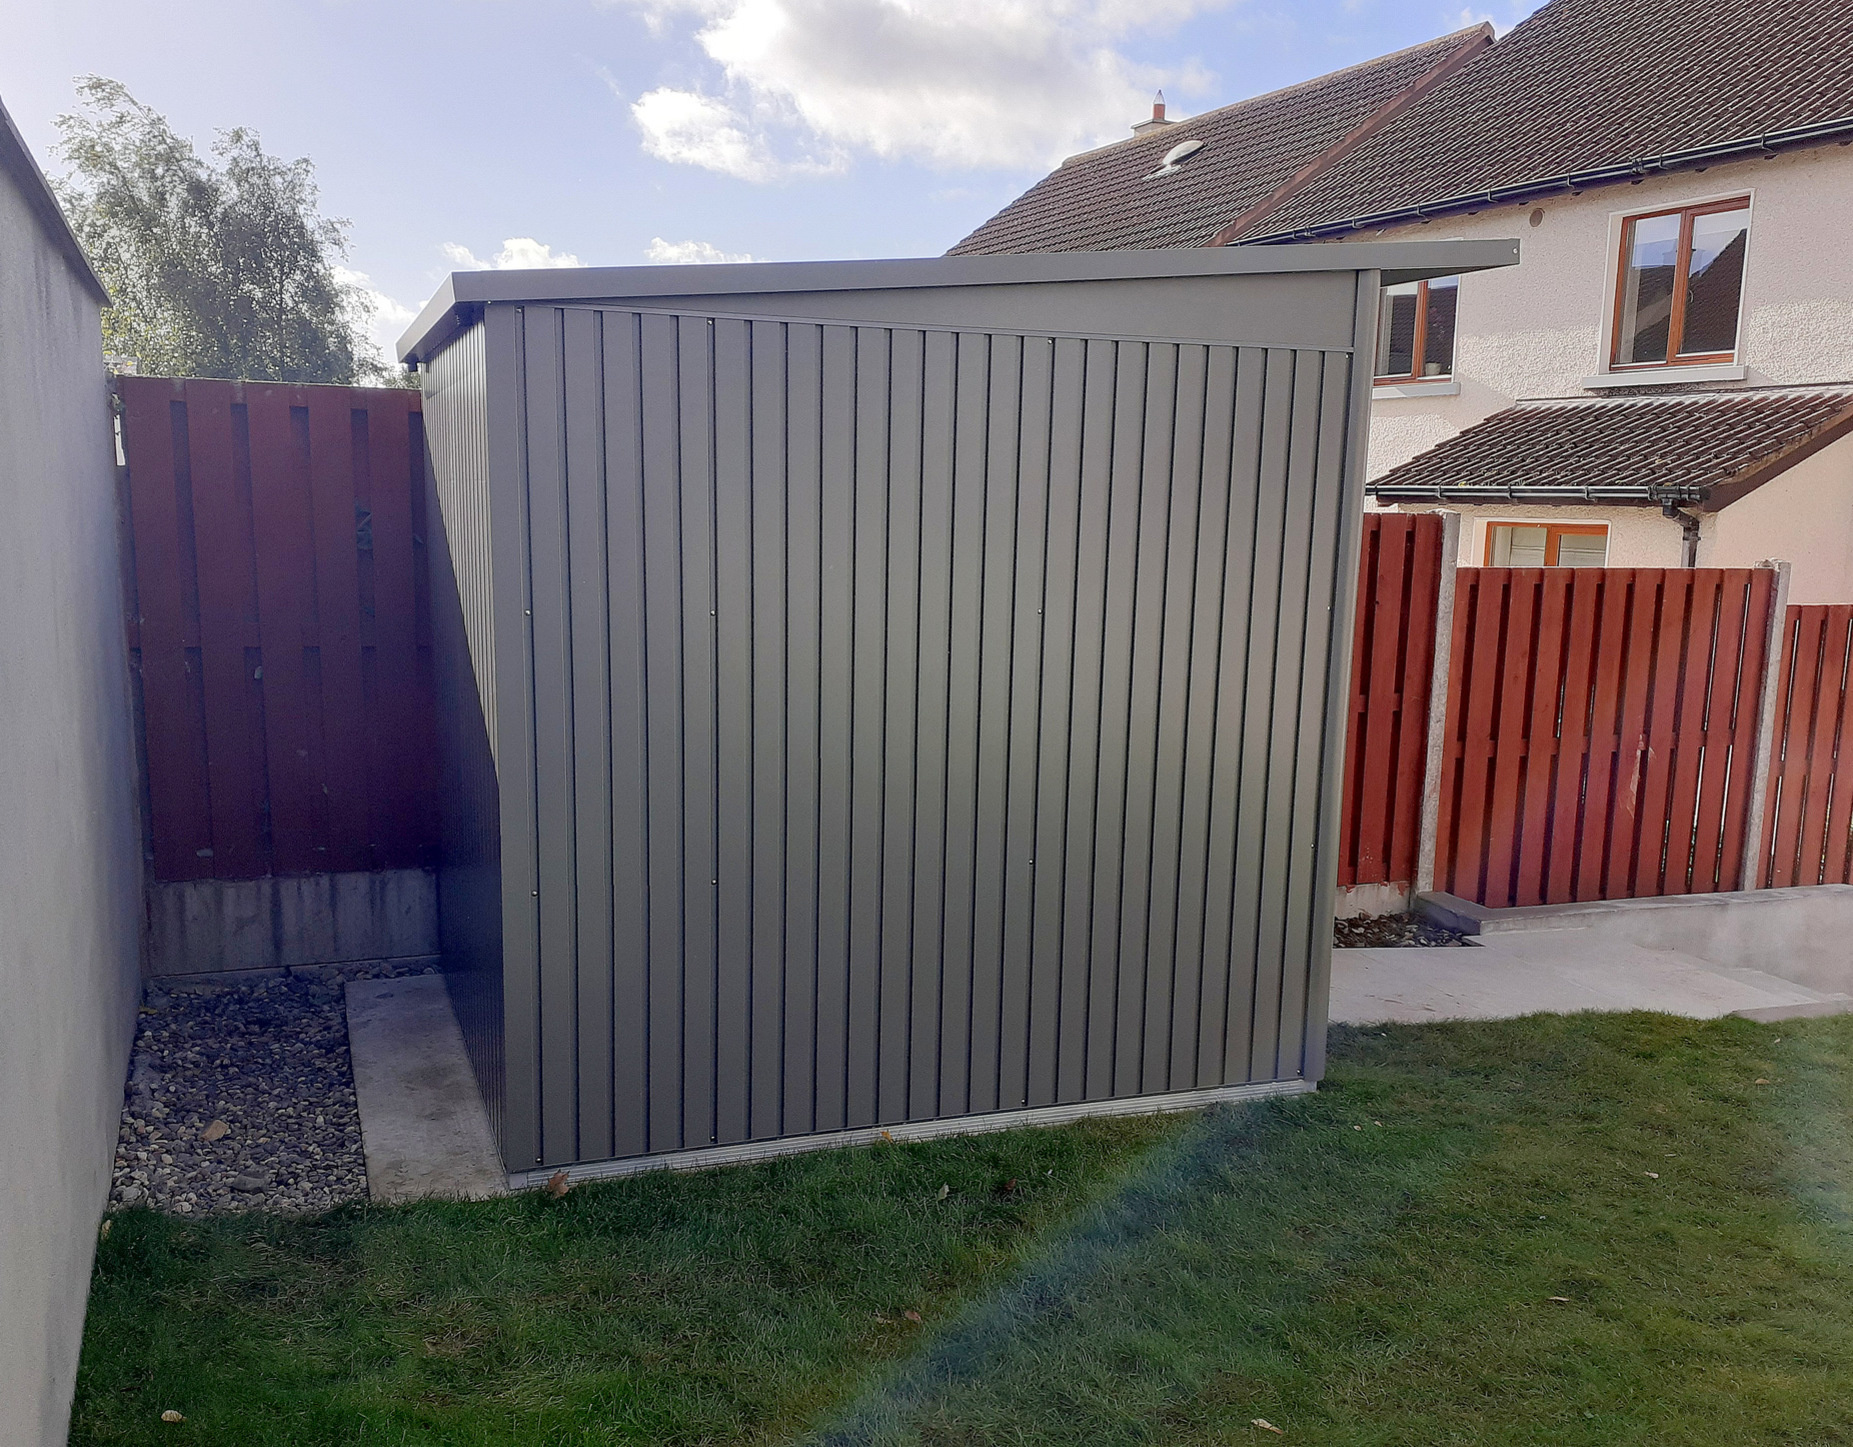 Biohort AvantGarde A2 in metallic quartz grey, supplied + fitted in Dundalk, Co Louth | Pay less for Biohort at Owen Chubb GardenStudio, Tel 087-2306 128